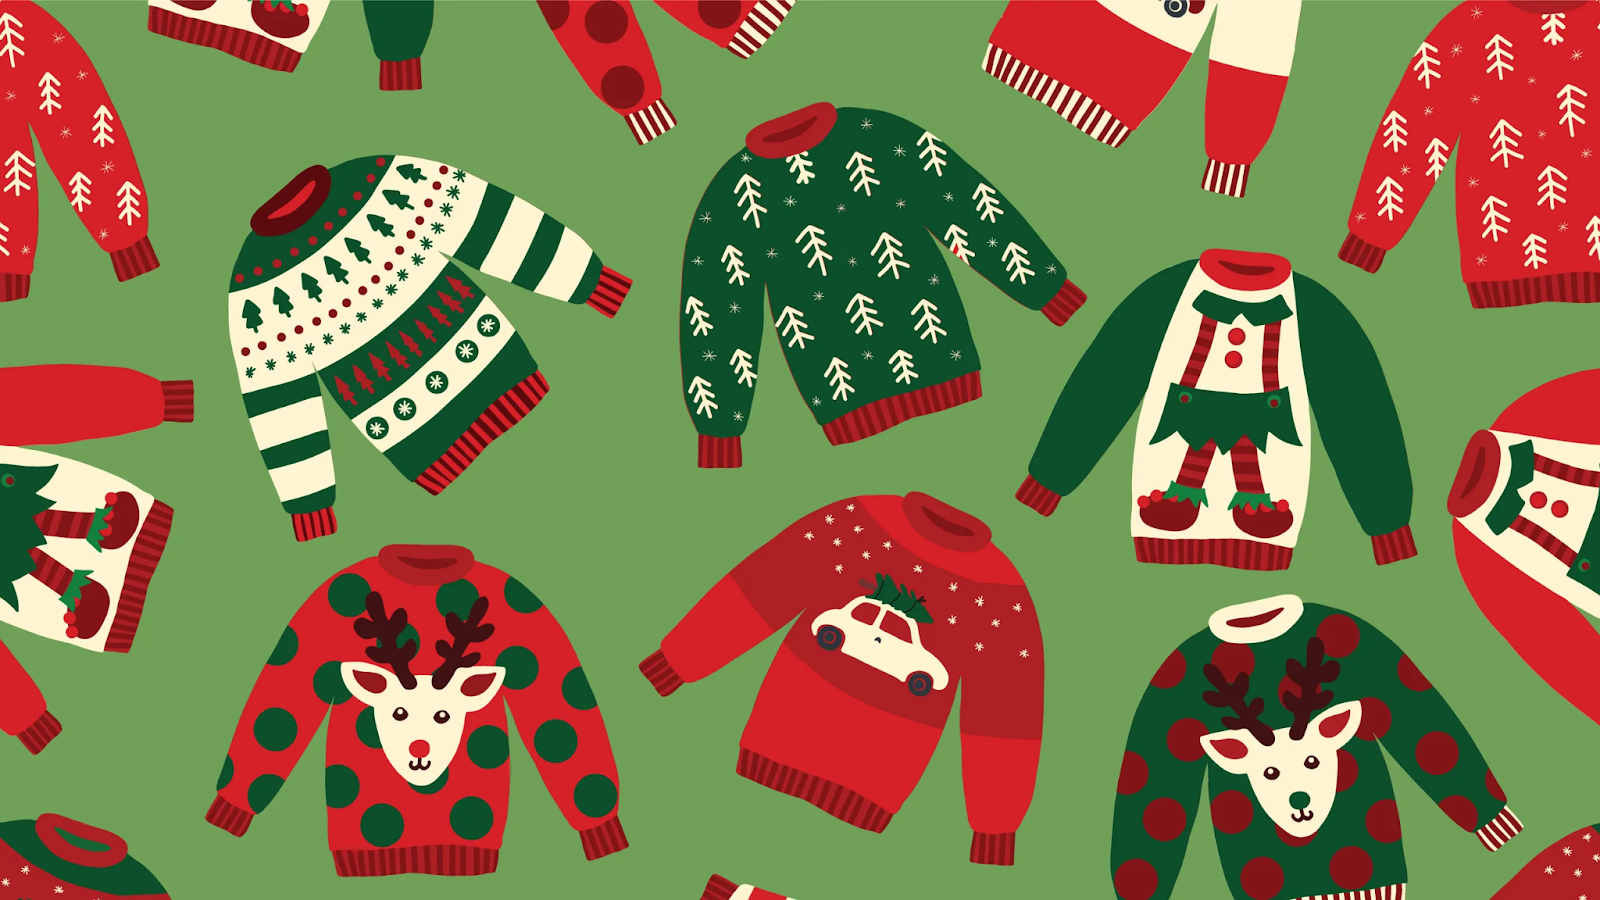 Choosing the perfect Ugly Christmas Sweater is an art that combines humor, creativity, and a touch of festive spirit